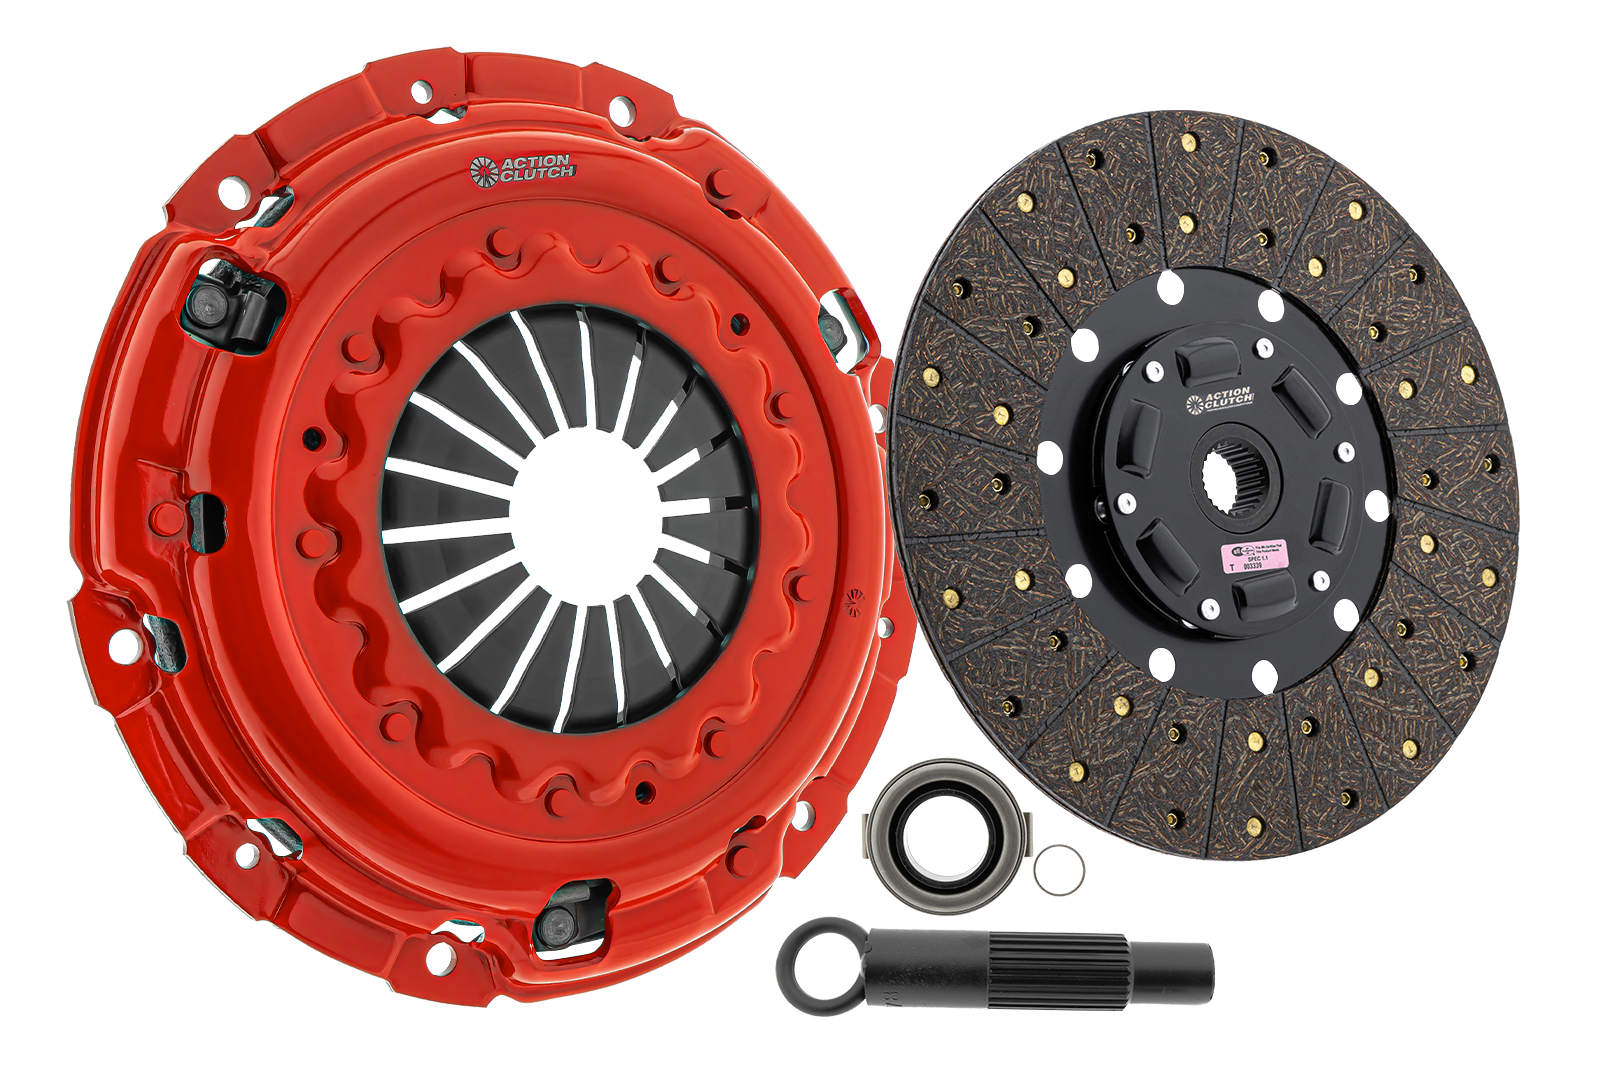 Stage 1 Clutch Kit (1OS) for Mitsubishi 3000GT 1991-1999 3.0L (6G72) Non-Turbo FWD